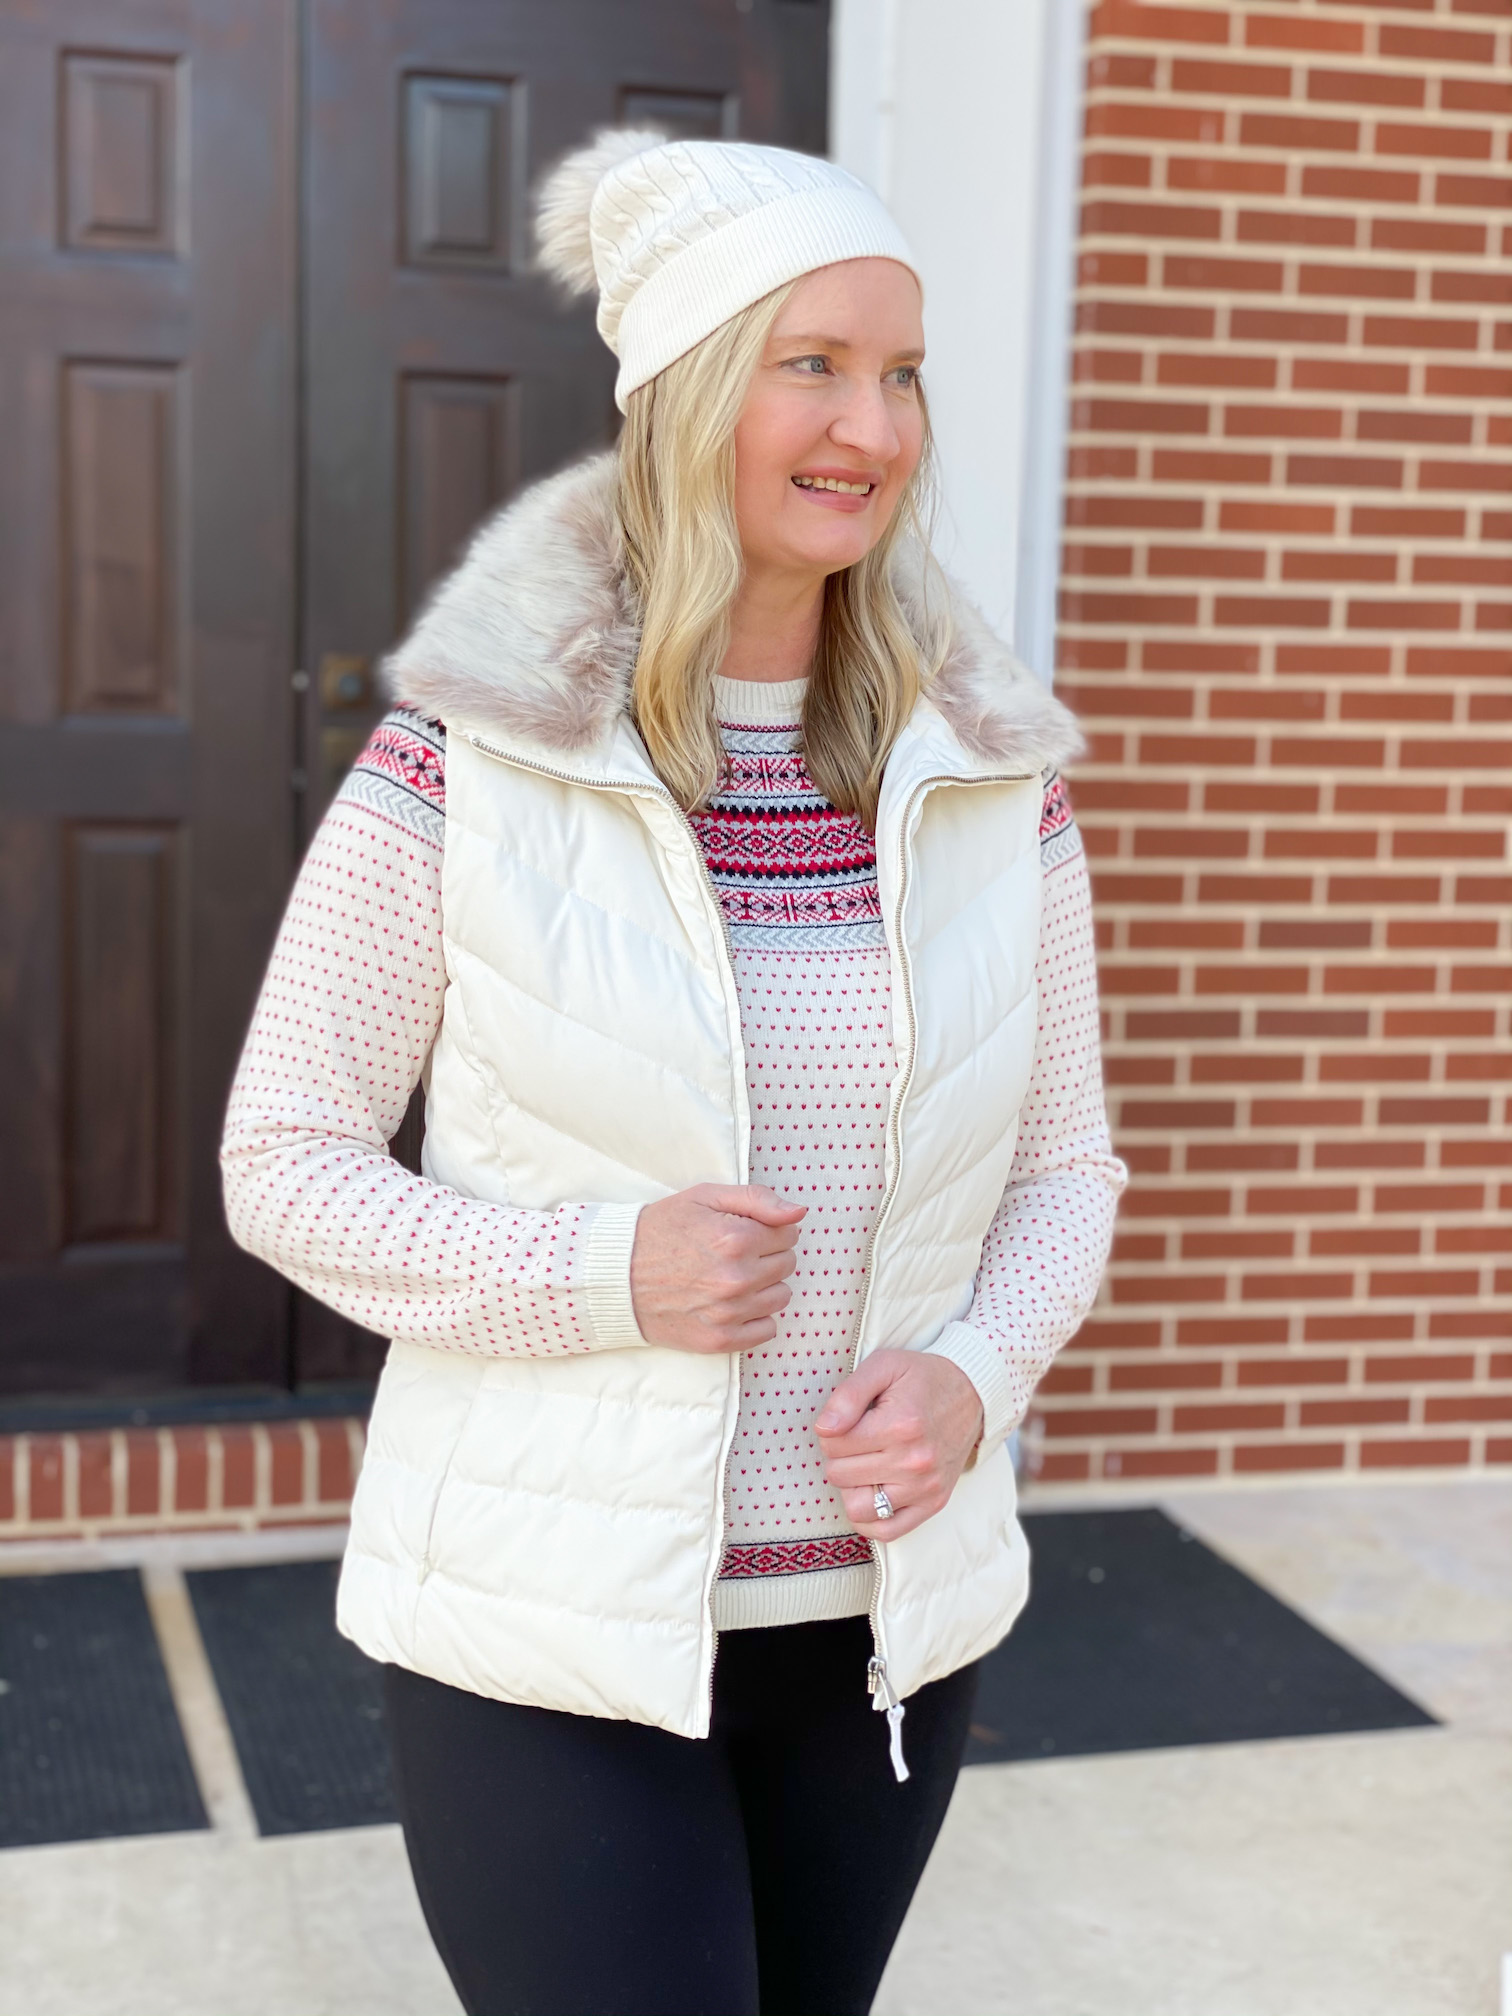 Chic and warm fall outfits in Talbots November collection